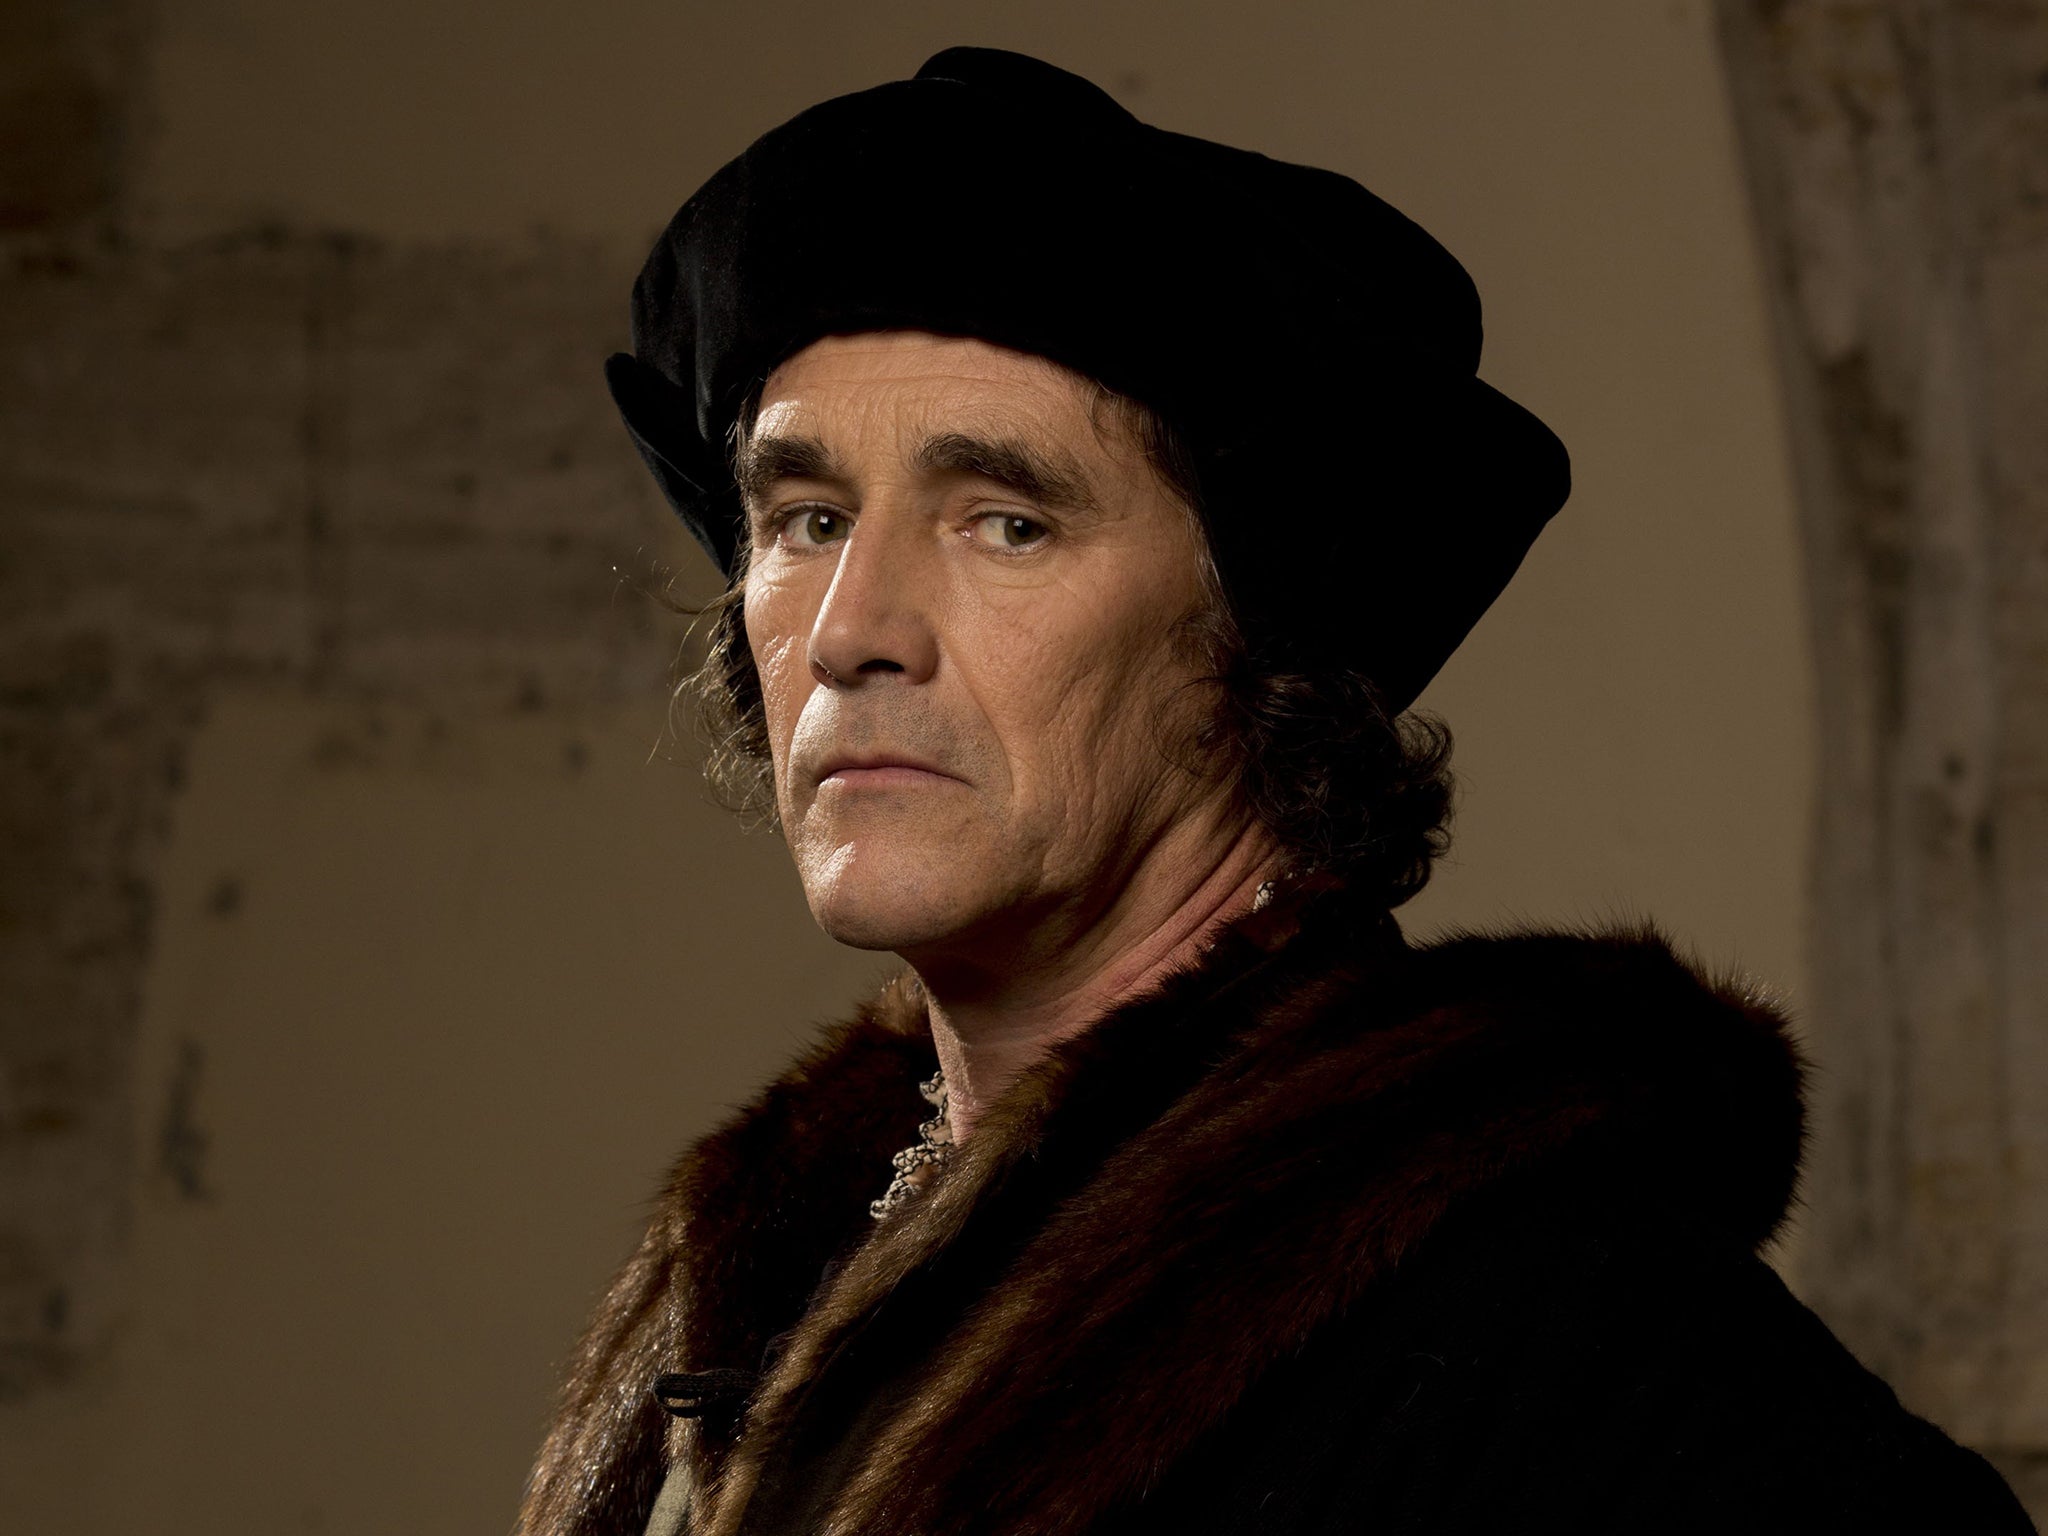 Mark Rylance's stage work over the past 20 years has earned him just that accolade in many quarters but who, until now, could walk down the street largely unnoticed